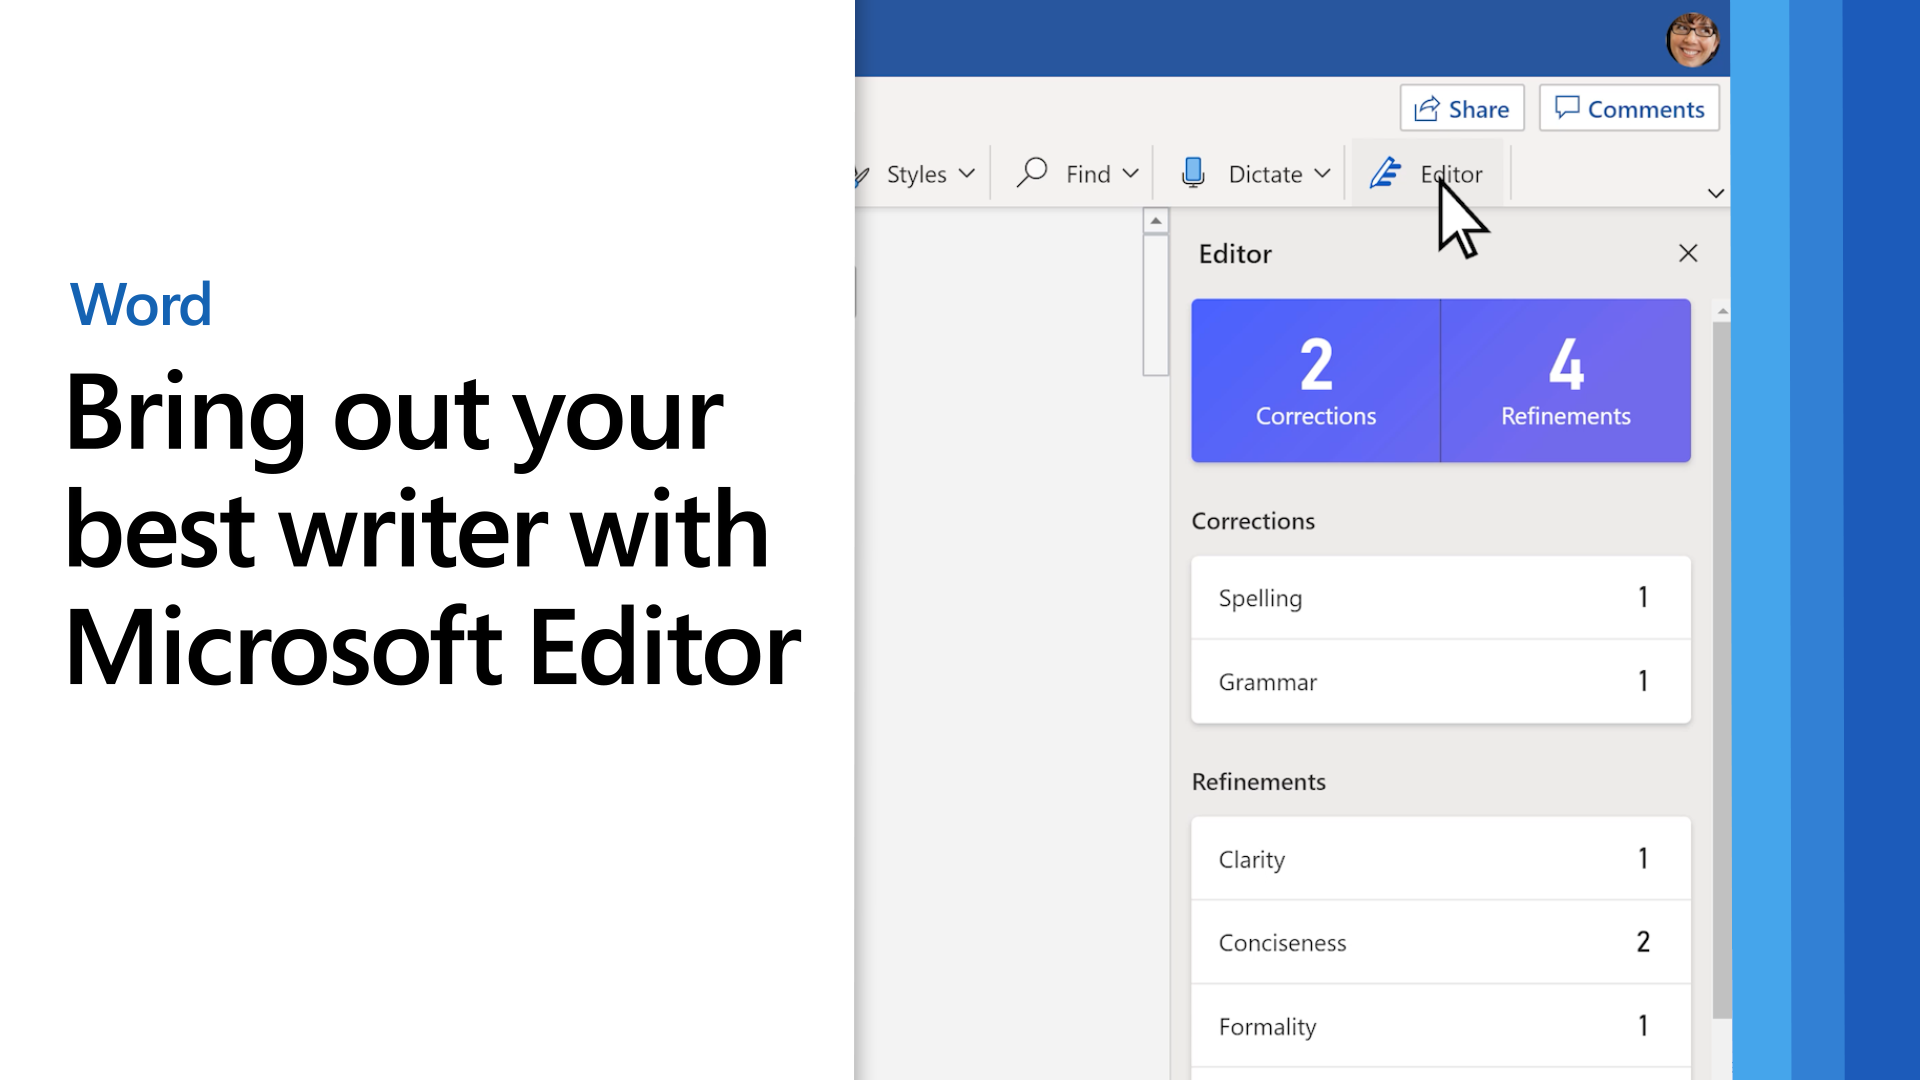 Bring out your best writer with Microsoft Editor